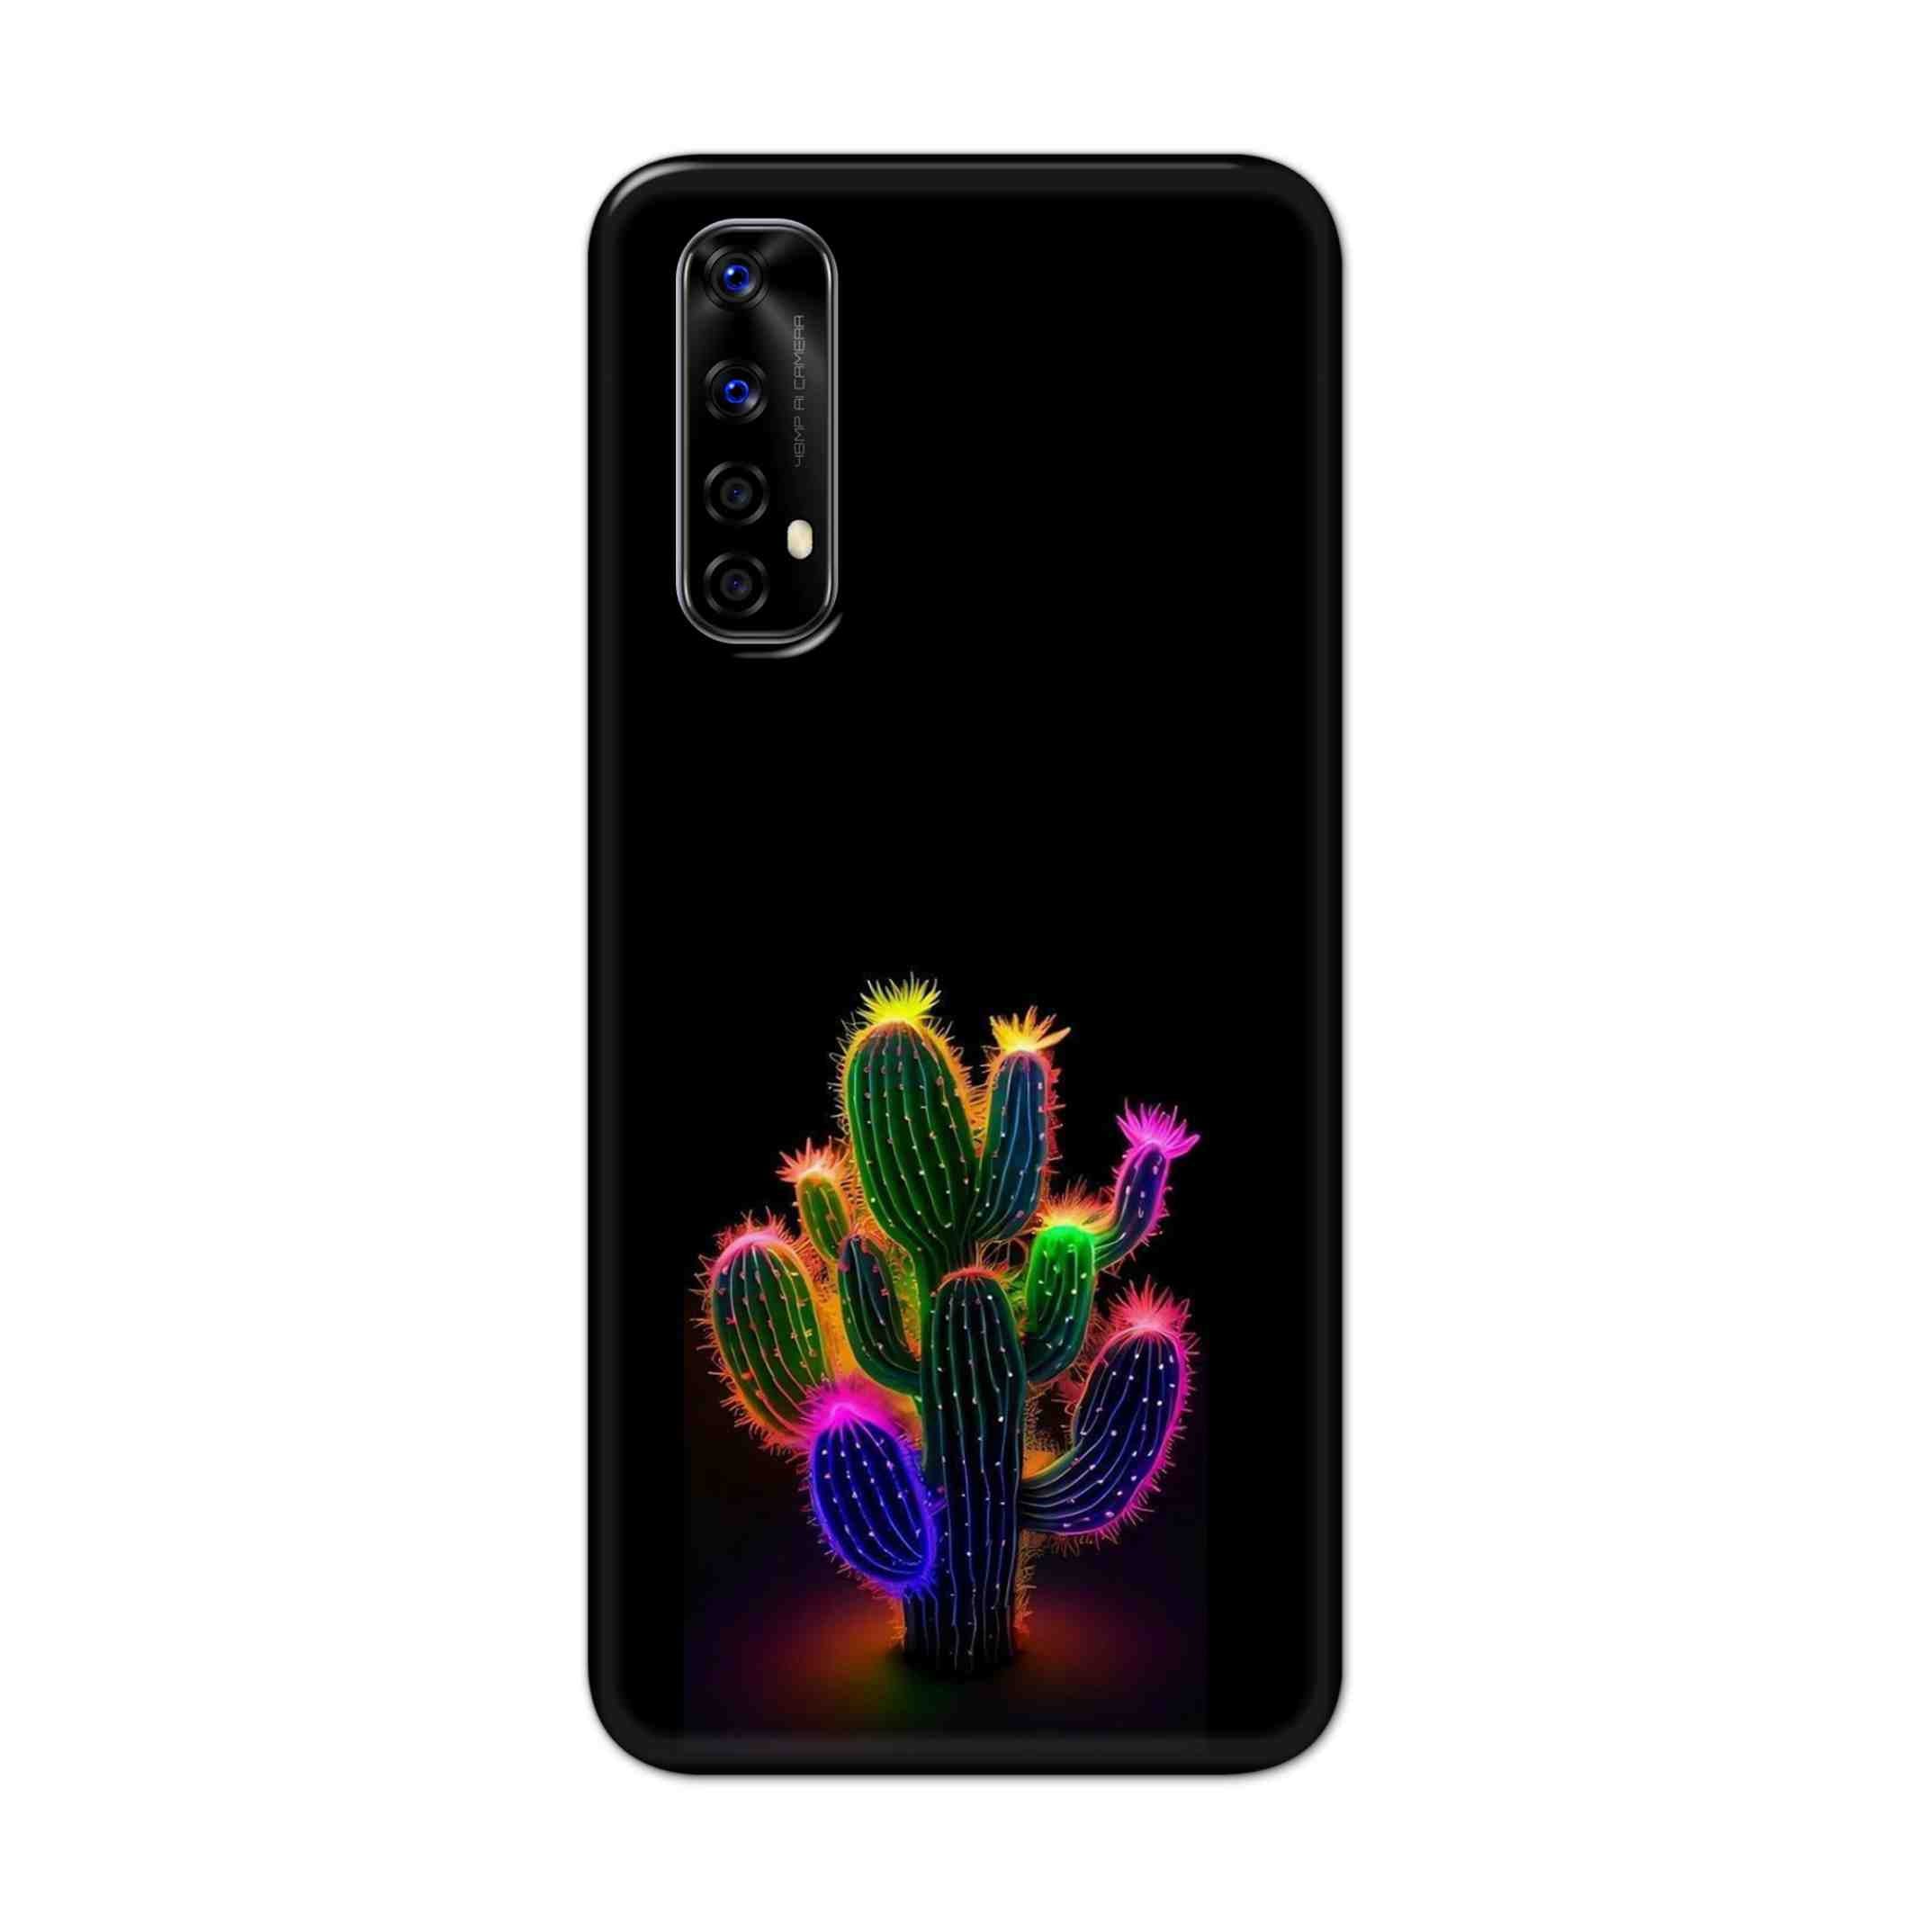 Buy Neon Flower Hard Back Mobile Phone Case Cover For Realme Narzo 20 Pro Online